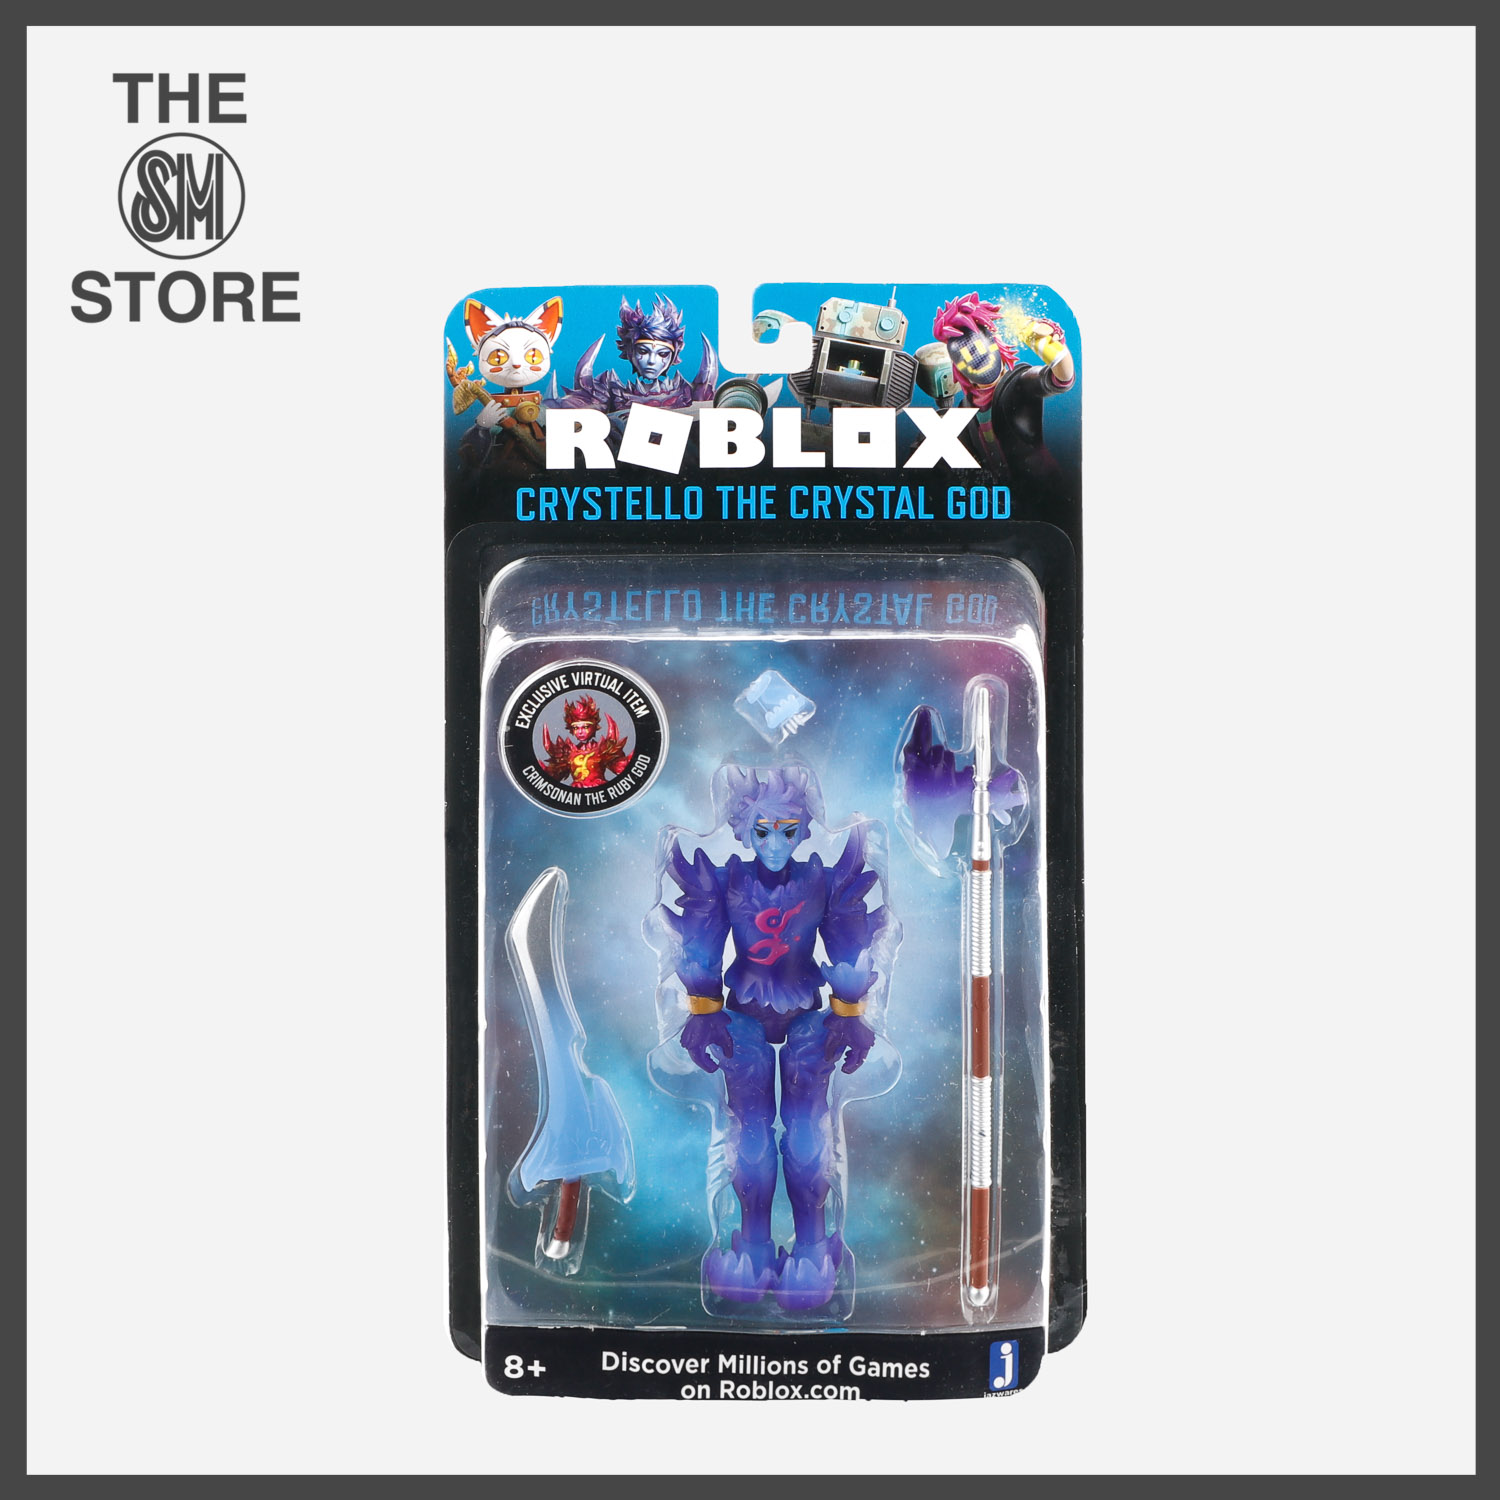 Buy Roblox Action Figures Online Lazada Com Ph - amazon com roblox imagination collection crystello the crystal